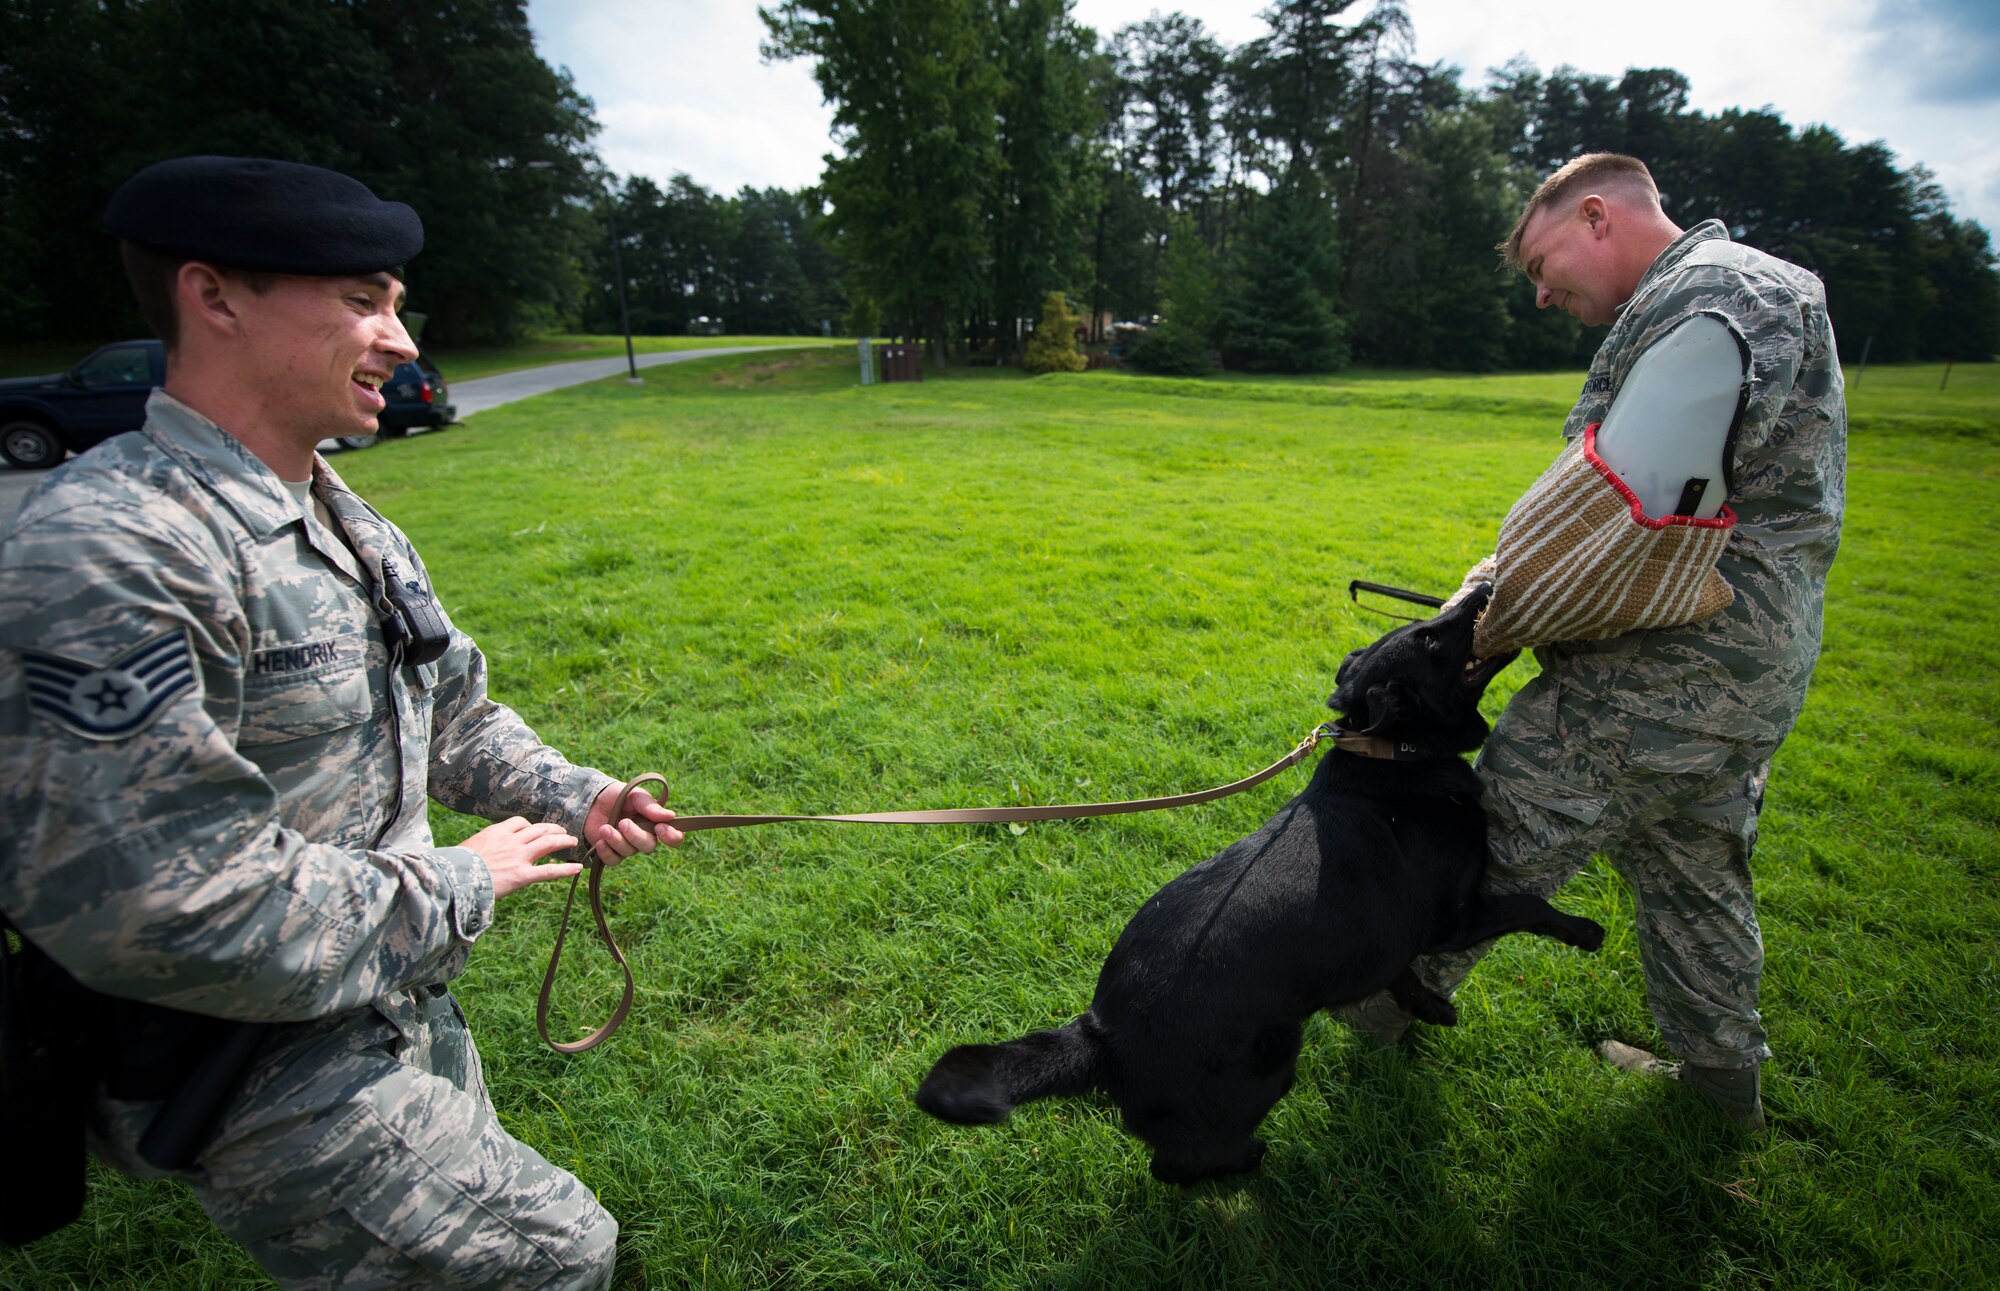 Staff Sgt. Tyler Hendrix, left, and Tech. Sgt. Scott Heise, right, 11th Security Support Squadron military working dog handlers, train "Dixie" on controlled aggression techniques at Joint Base Andrews, Md., July 29, 2015. Controlled aggression techniques are used to intimidate or "take down" a potential suspect. (U.S. Air Force photo by Staff Sgt. Chad C. Strohmeyer)(Released)